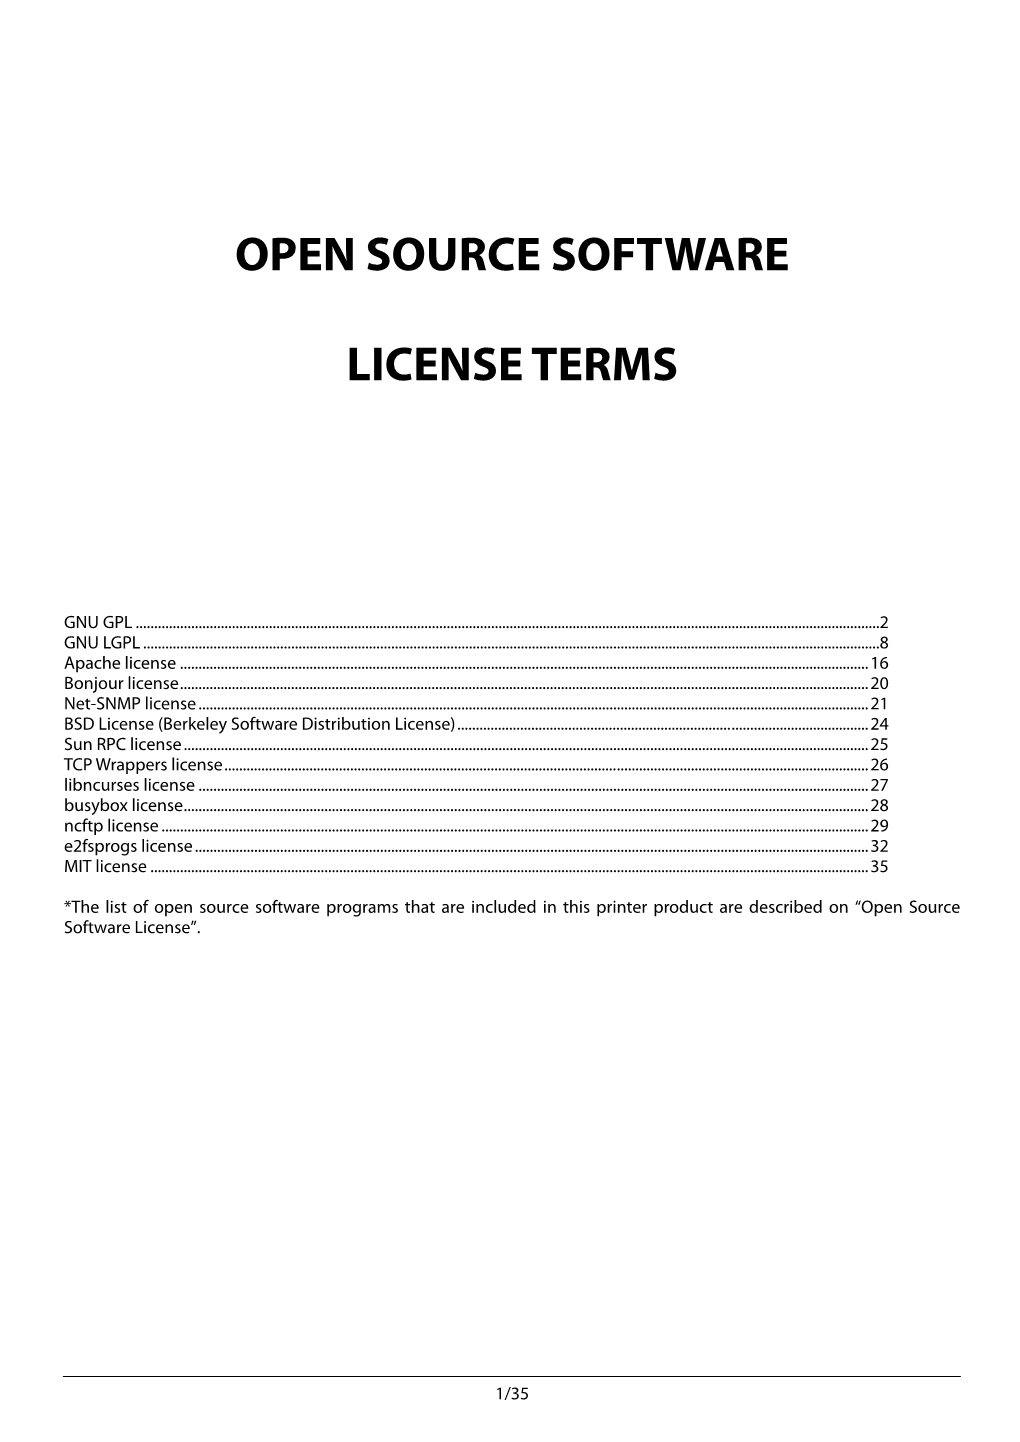 Open Source Software License Terms